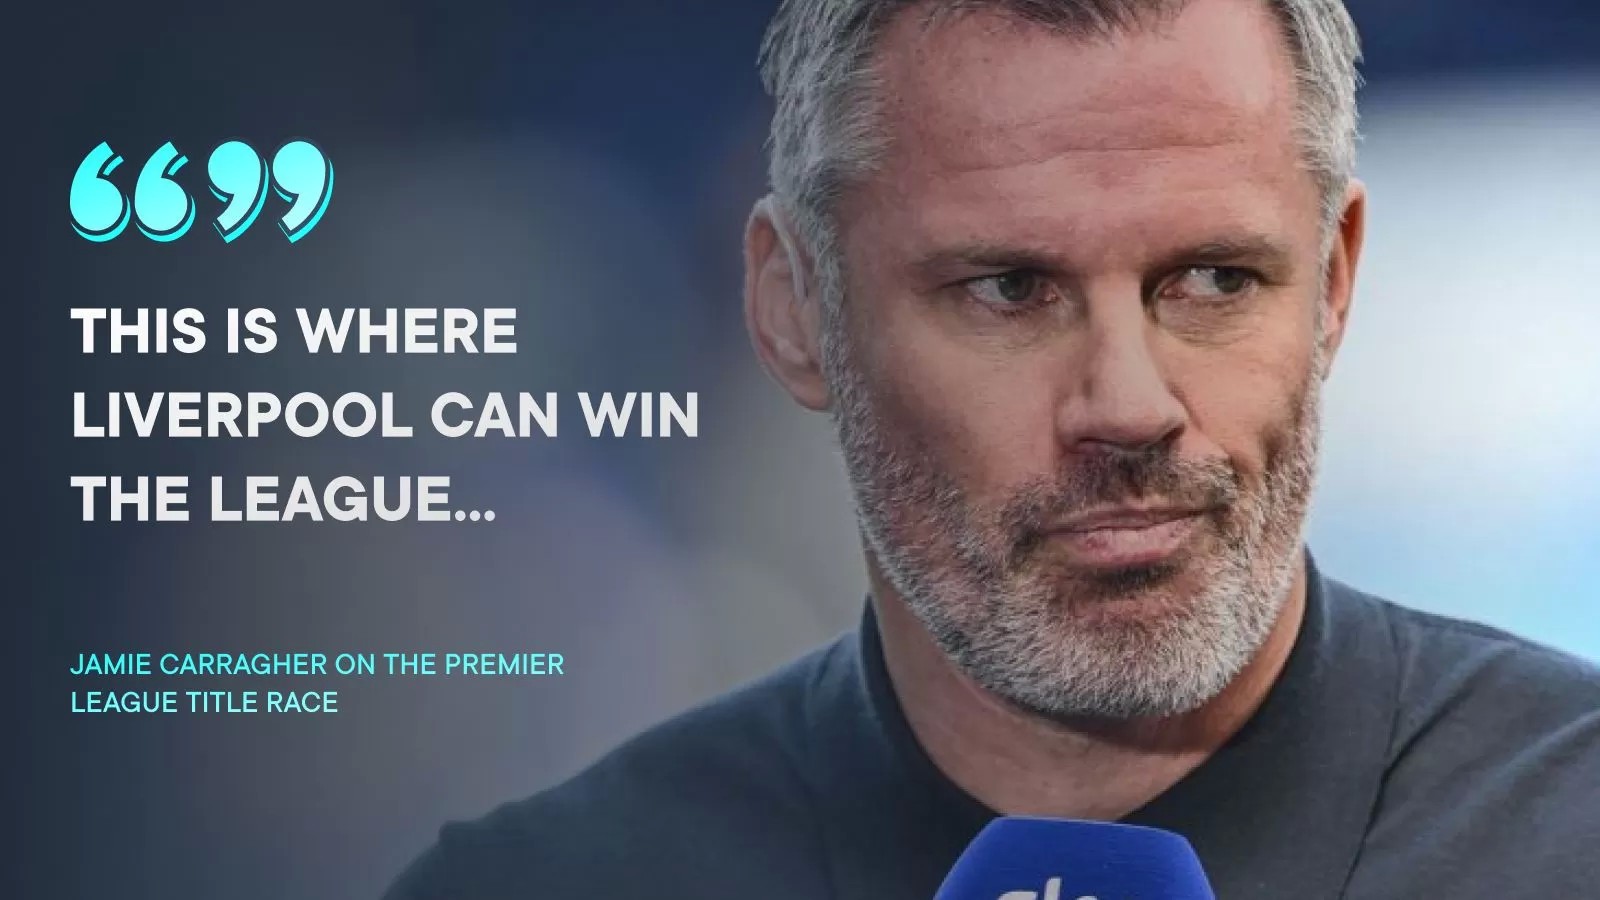 Jamie Carragher claims Liverpool ‘can win the Premier League’ ahead of Arsenal, City for one reason